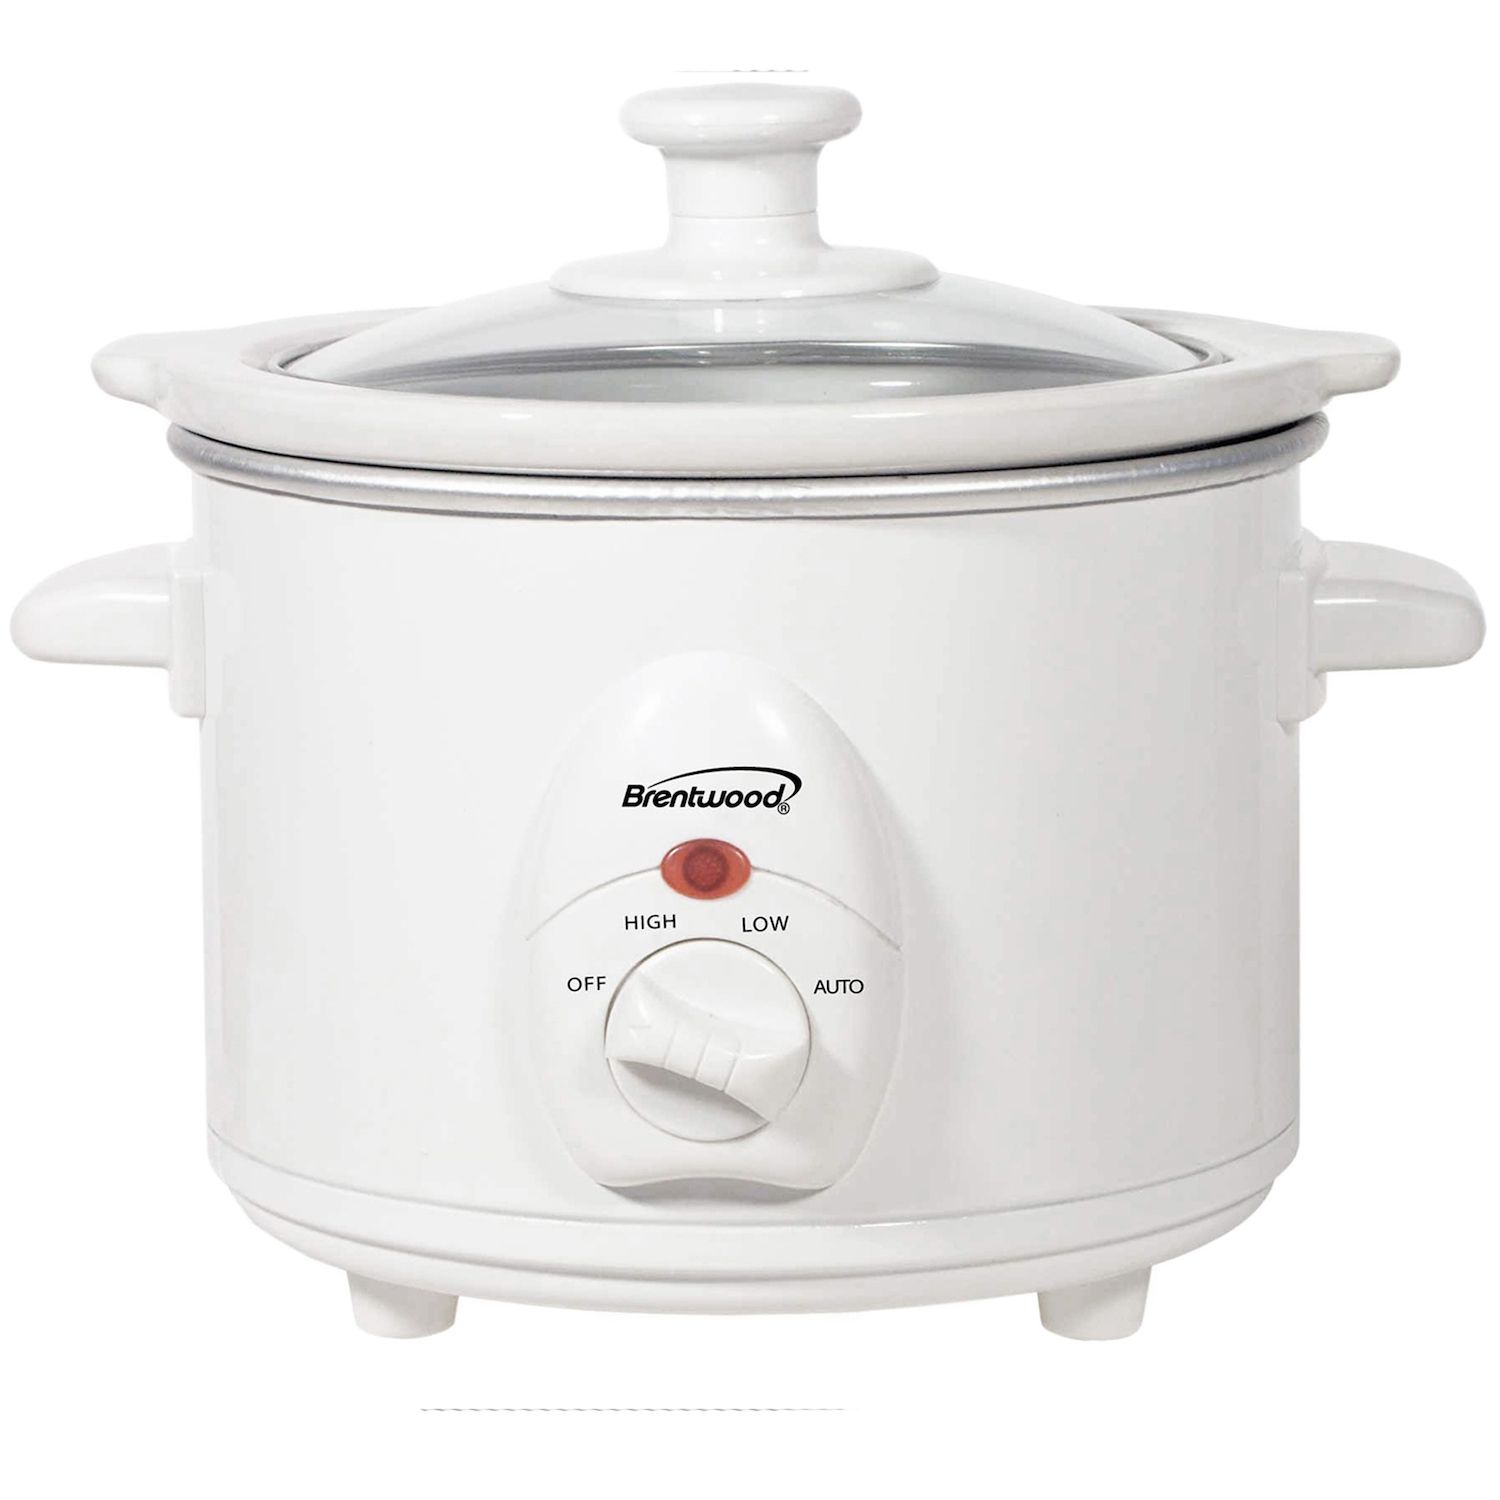 Toastmaster 4-Quart Digital Slow Cooker with Locking Lid (Stainless Steel)